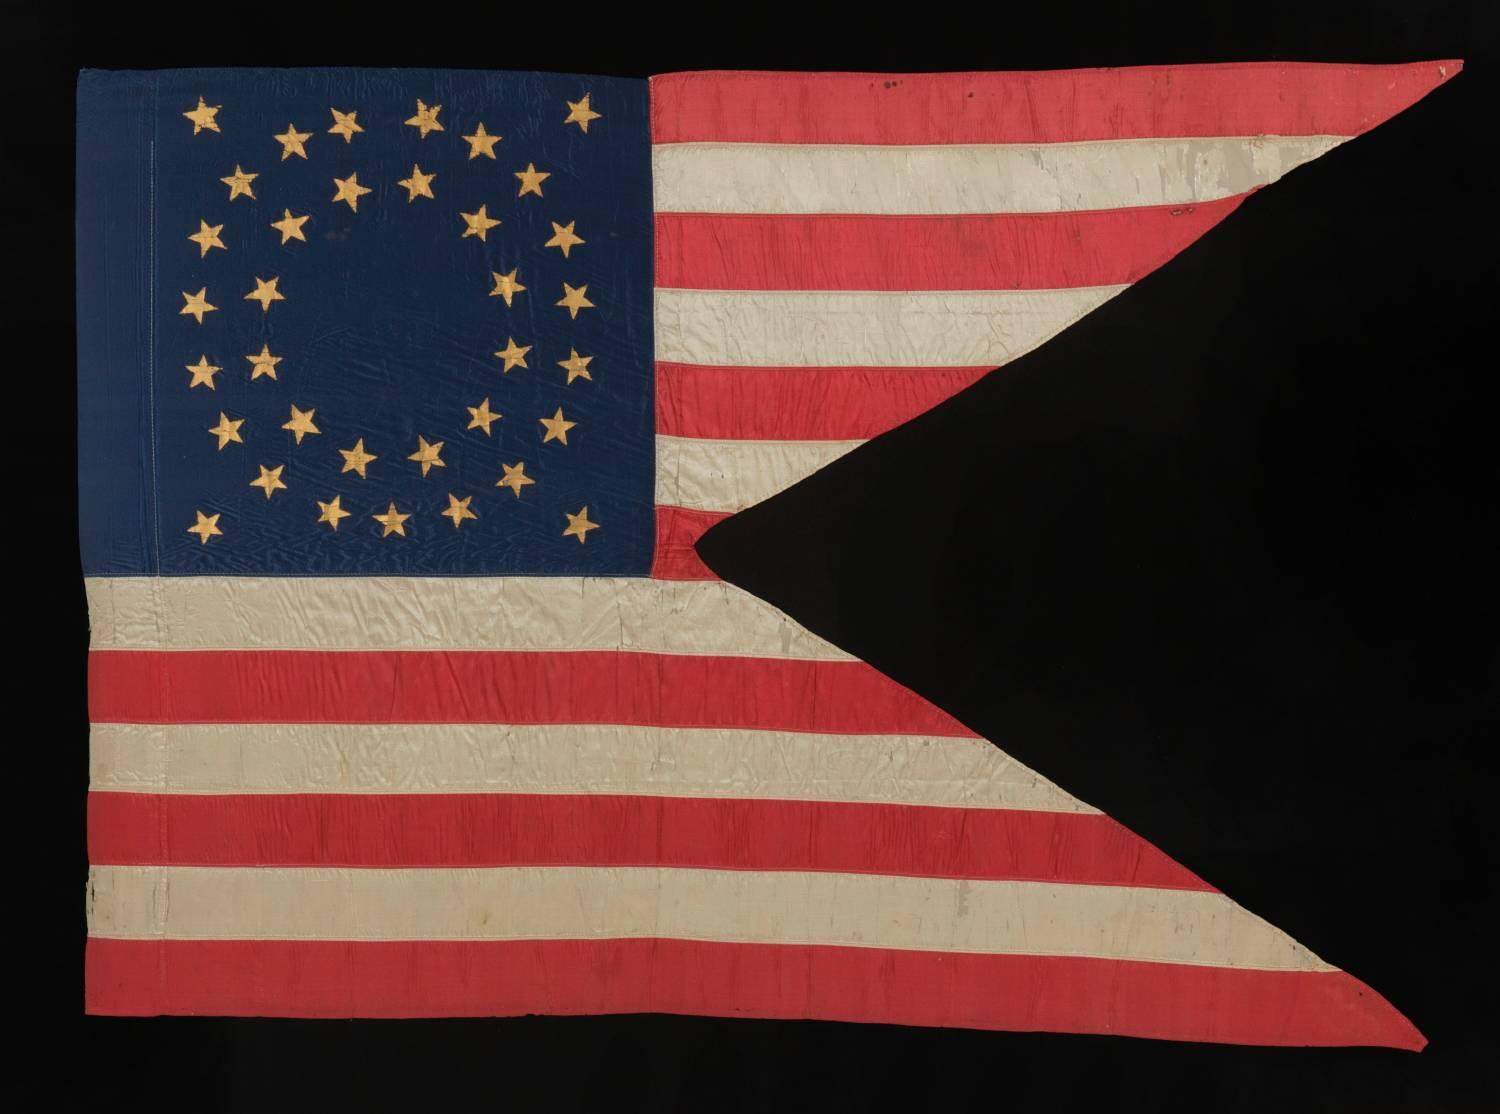 35 star silk cavalry Guidon with gilt-painted stars, in an exceptional state of preservation, Civil War period, 1863-1865:

Military issued, Union Army, Civil War battle colors are one of the "Holy Grail's" of the flag collecting world.